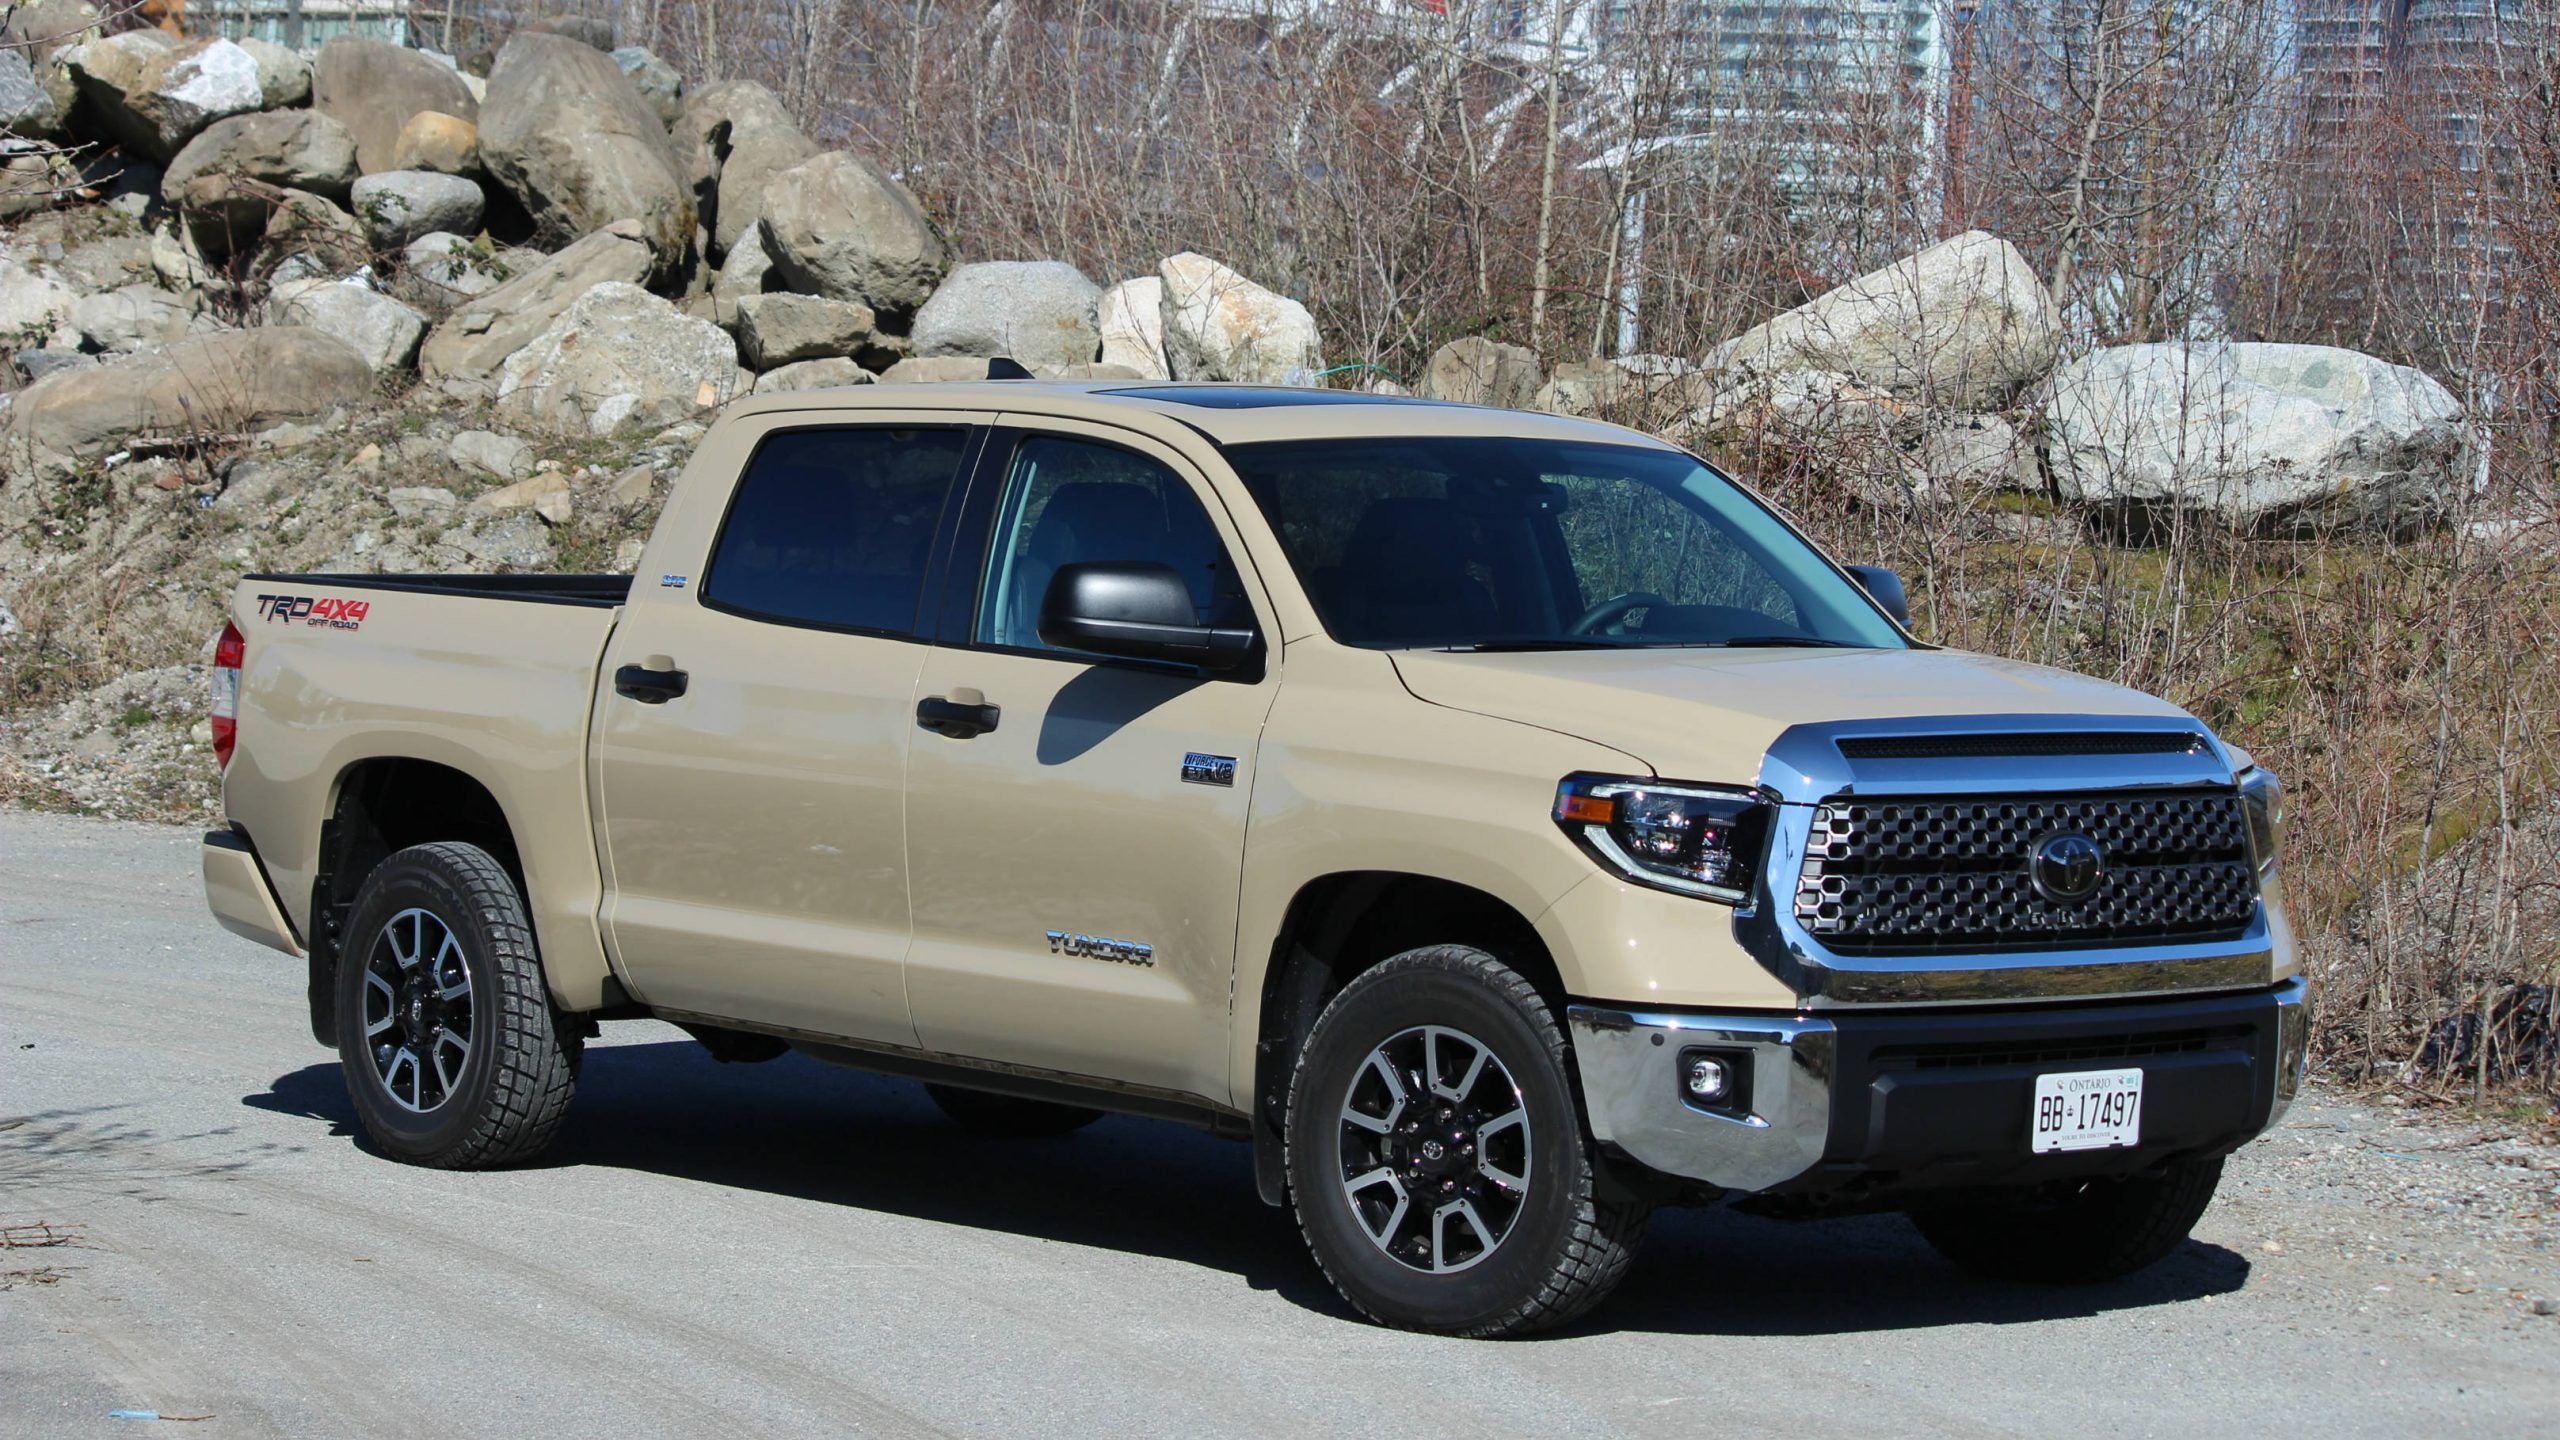 2021 Toyota Tundra Wallpapers - Wallpaper Cave